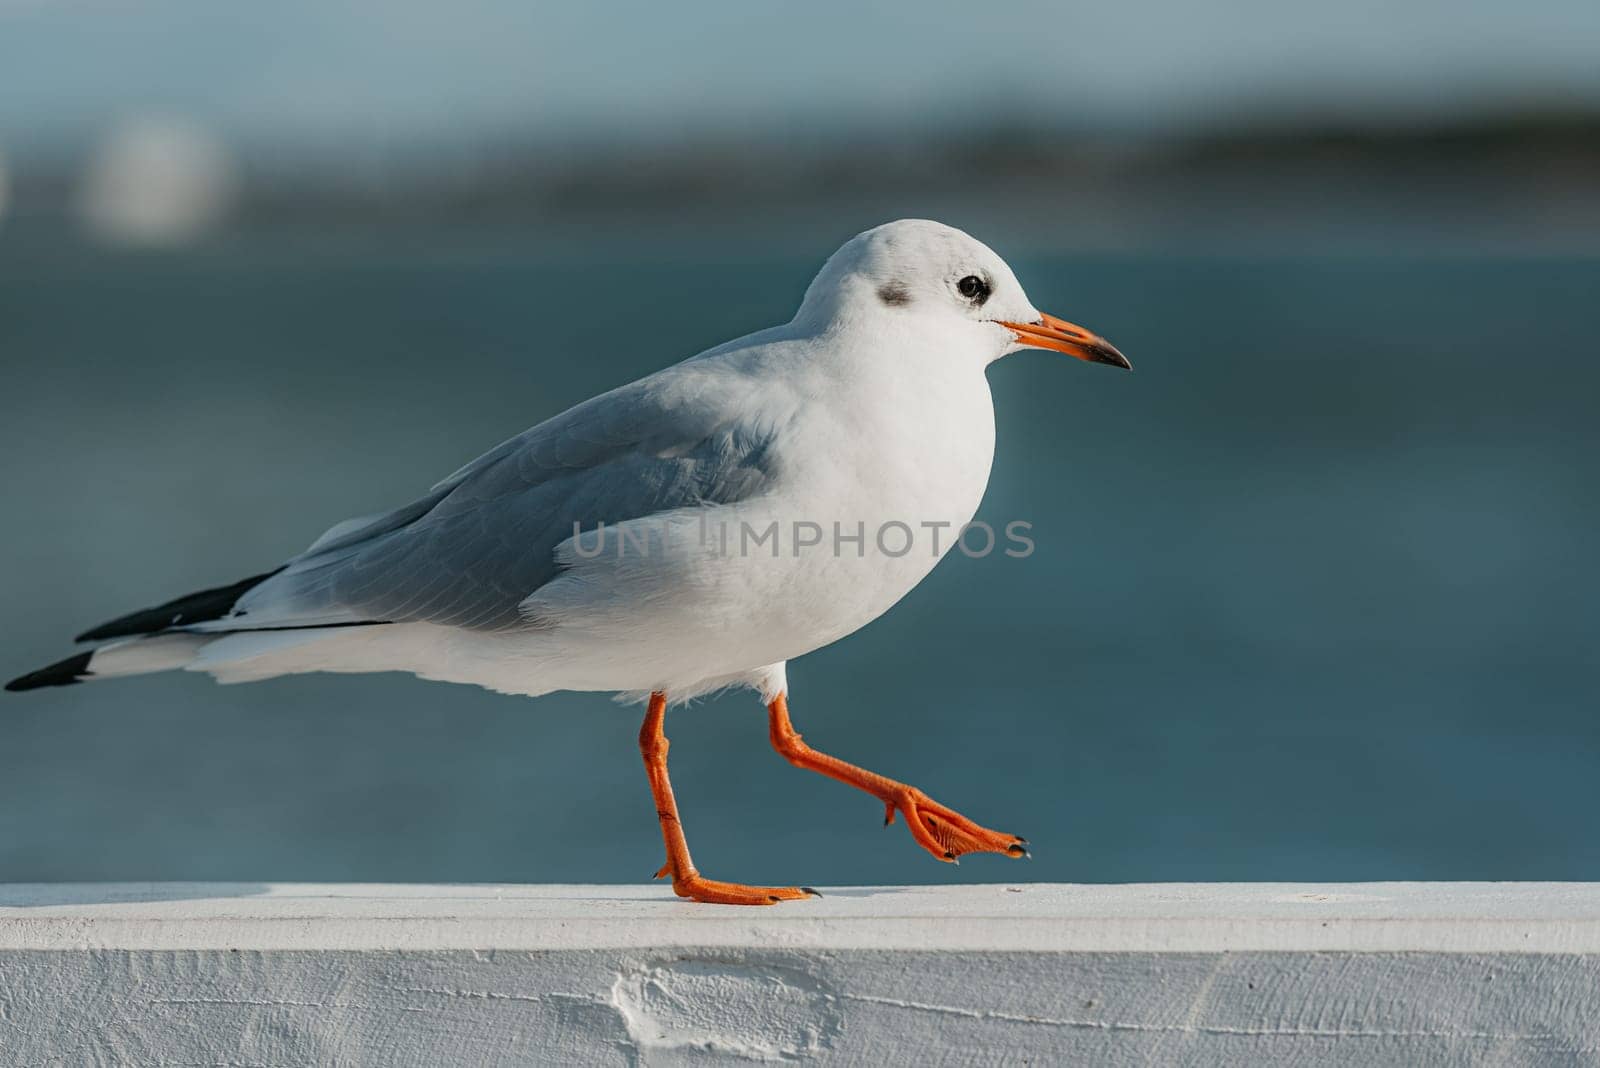 The black-headed adult gull in winter plumage on a pier fence on the Baltic Sea by RomanJRoyce